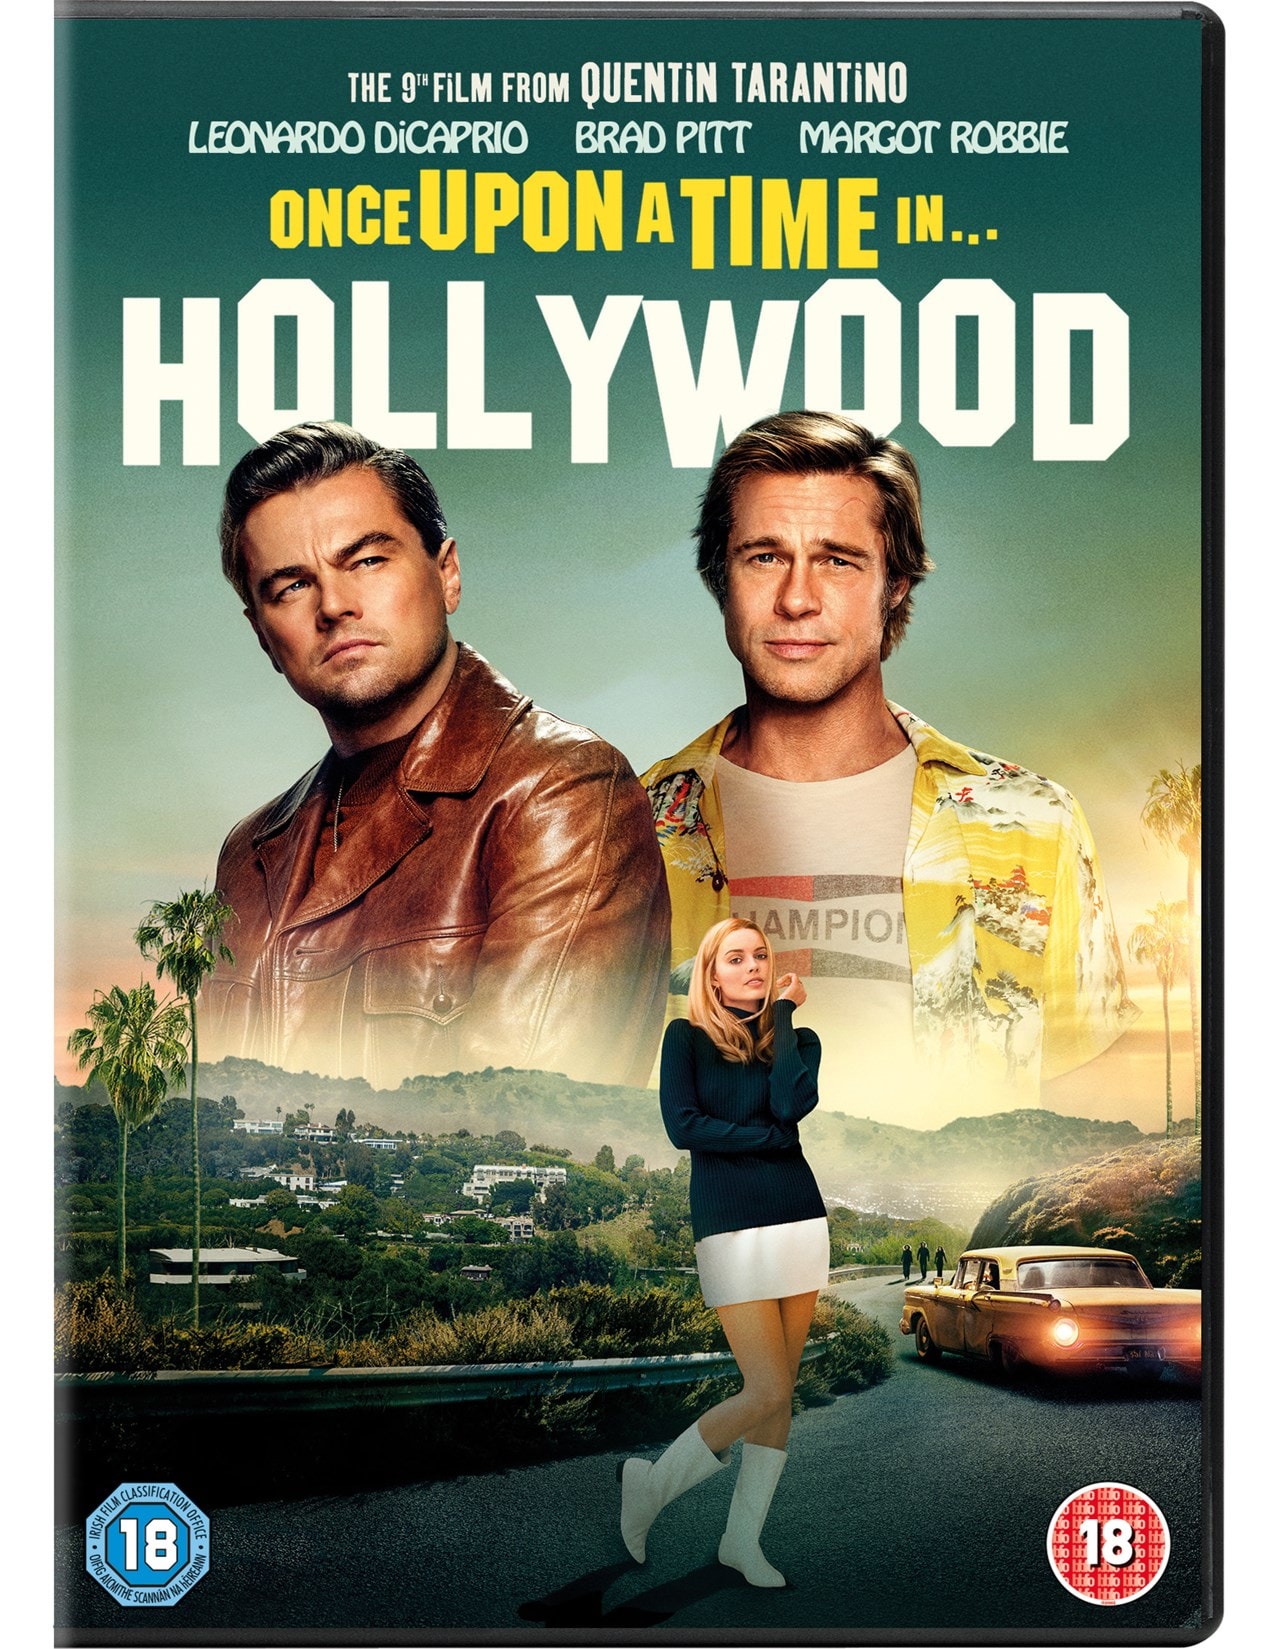 Once Upon a Time In... Hollywood | DVD | Free shipping over £20 | HMV Store